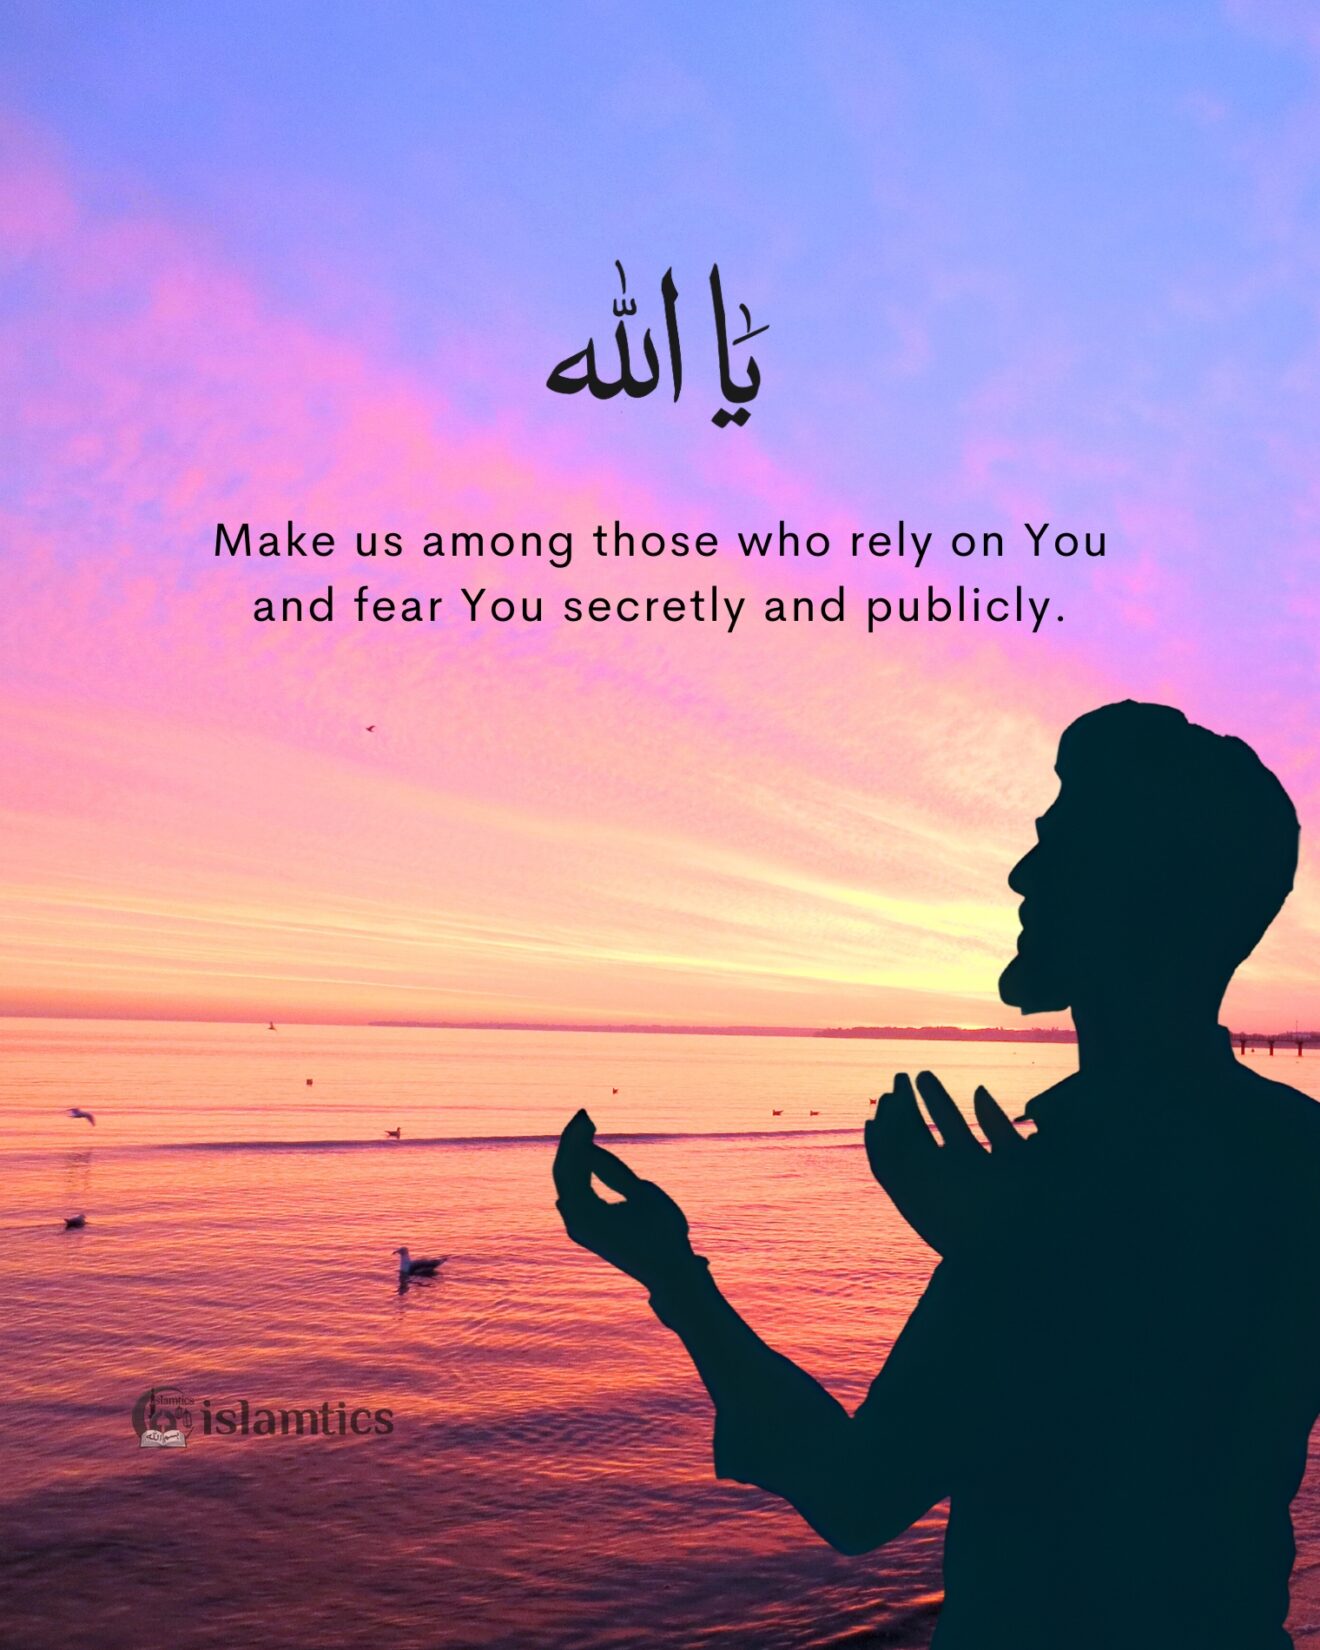 Ya Allah Make us among those who rely on You and fear You